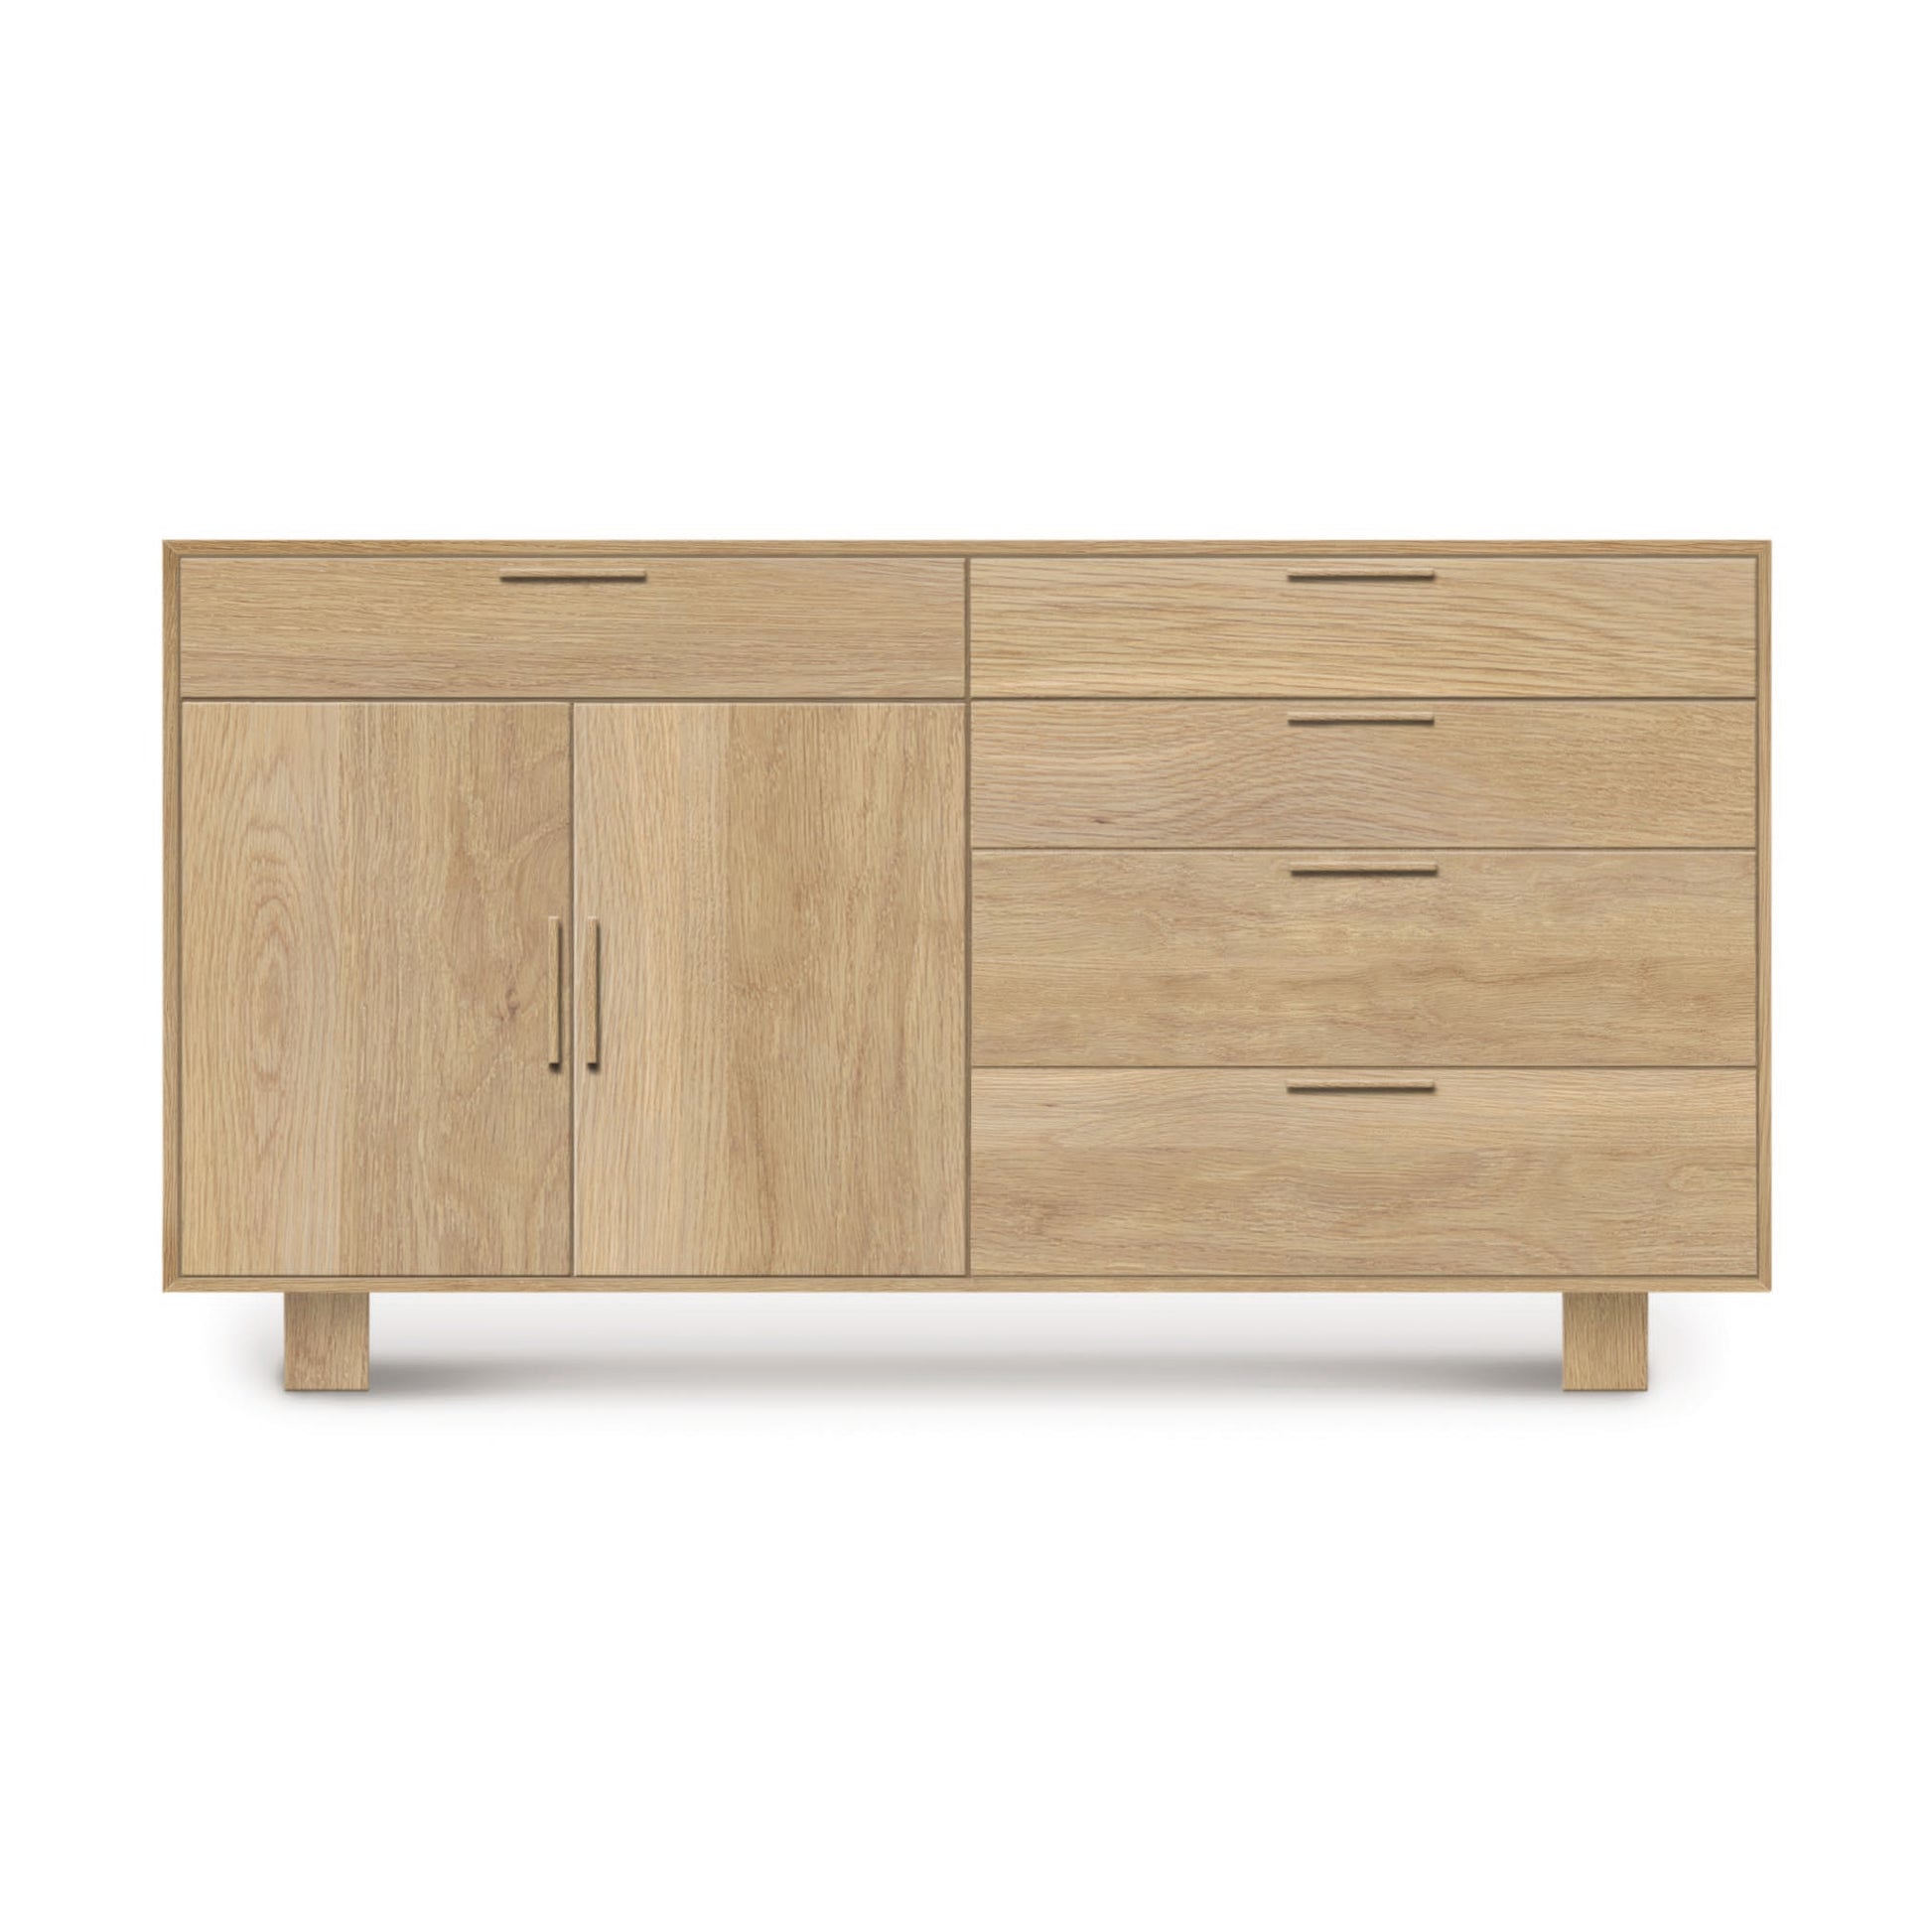 A Copeland Furniture Iso Oak 2 Door, 5 Drawer Buffet against a white background.